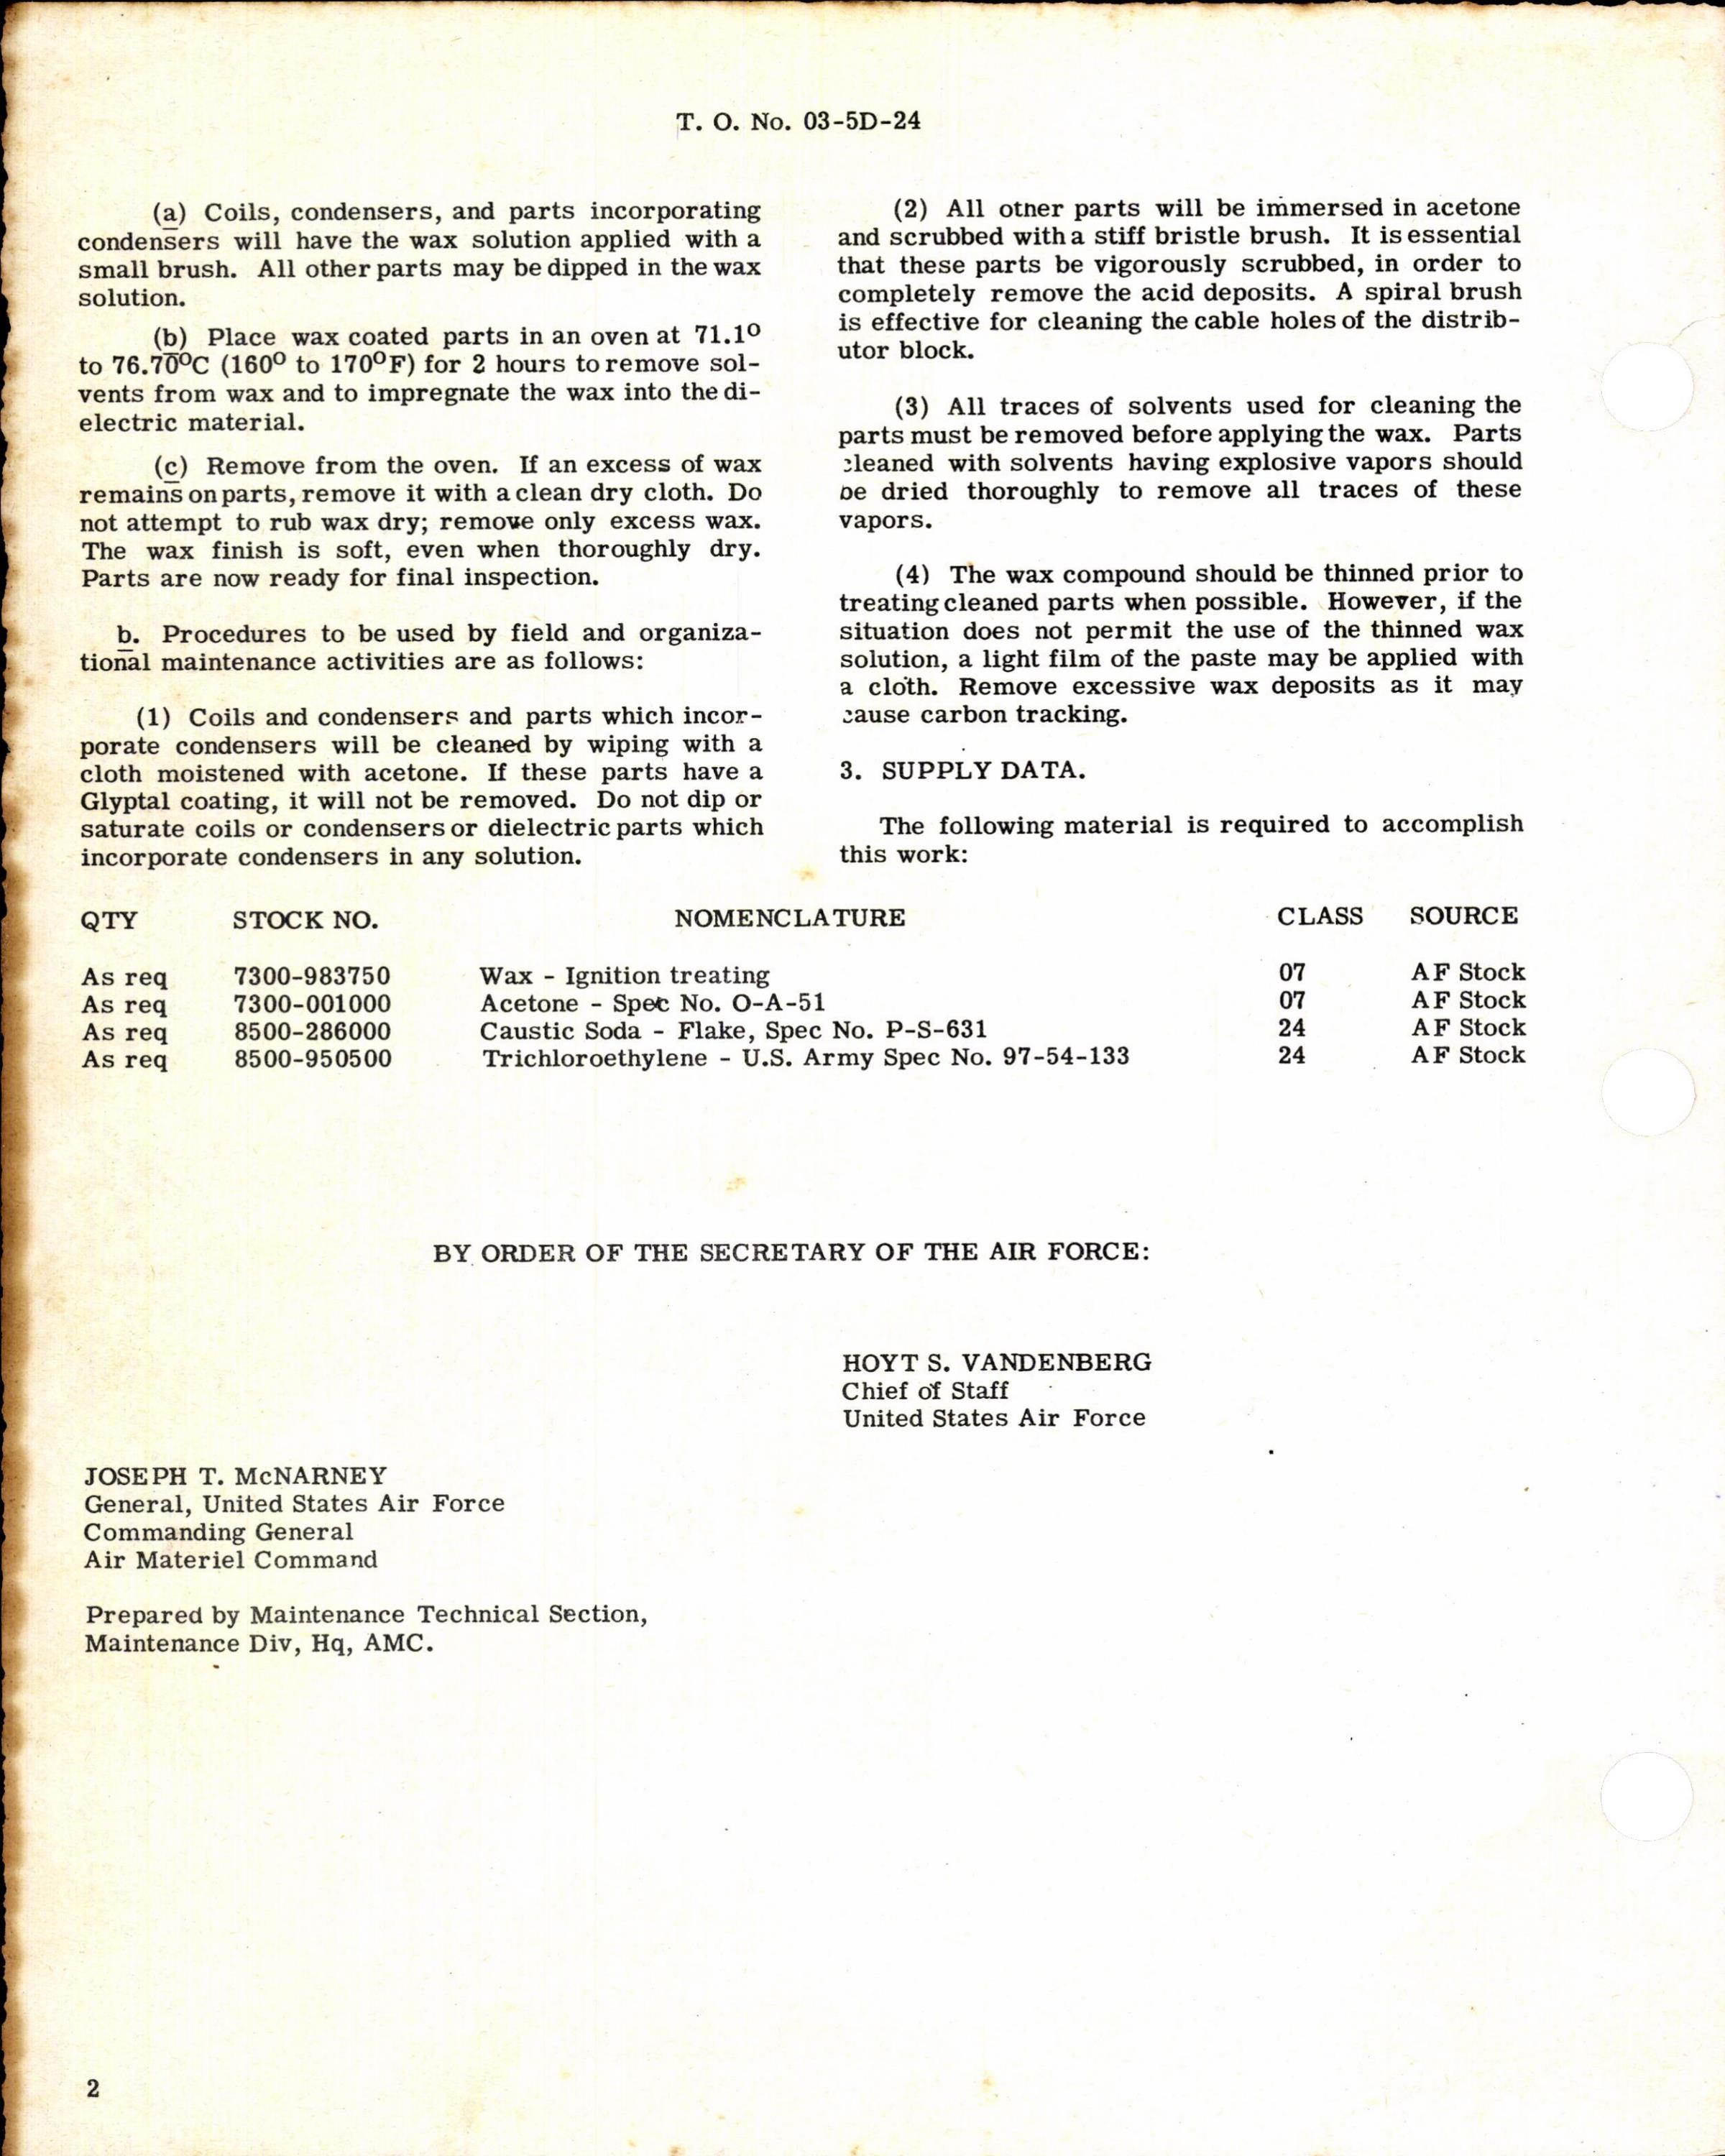 Sample page 2 from AirCorps Library document: Cleaning and Wax Treating of Magneto & Dielectric Parts